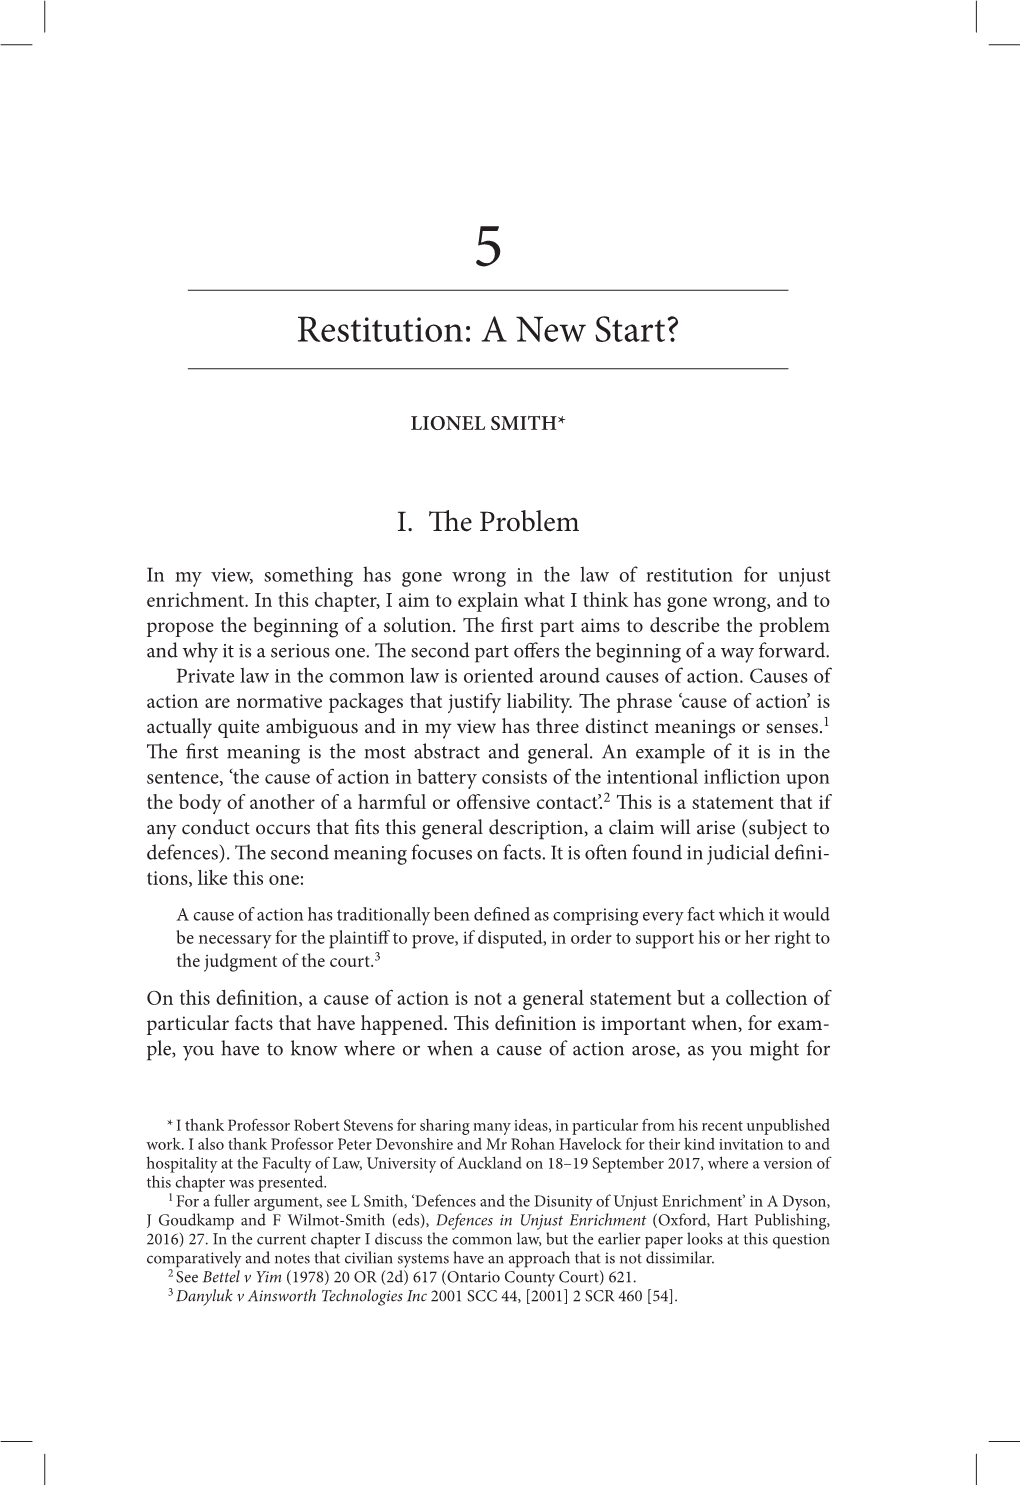 Restitution: a New Start ?